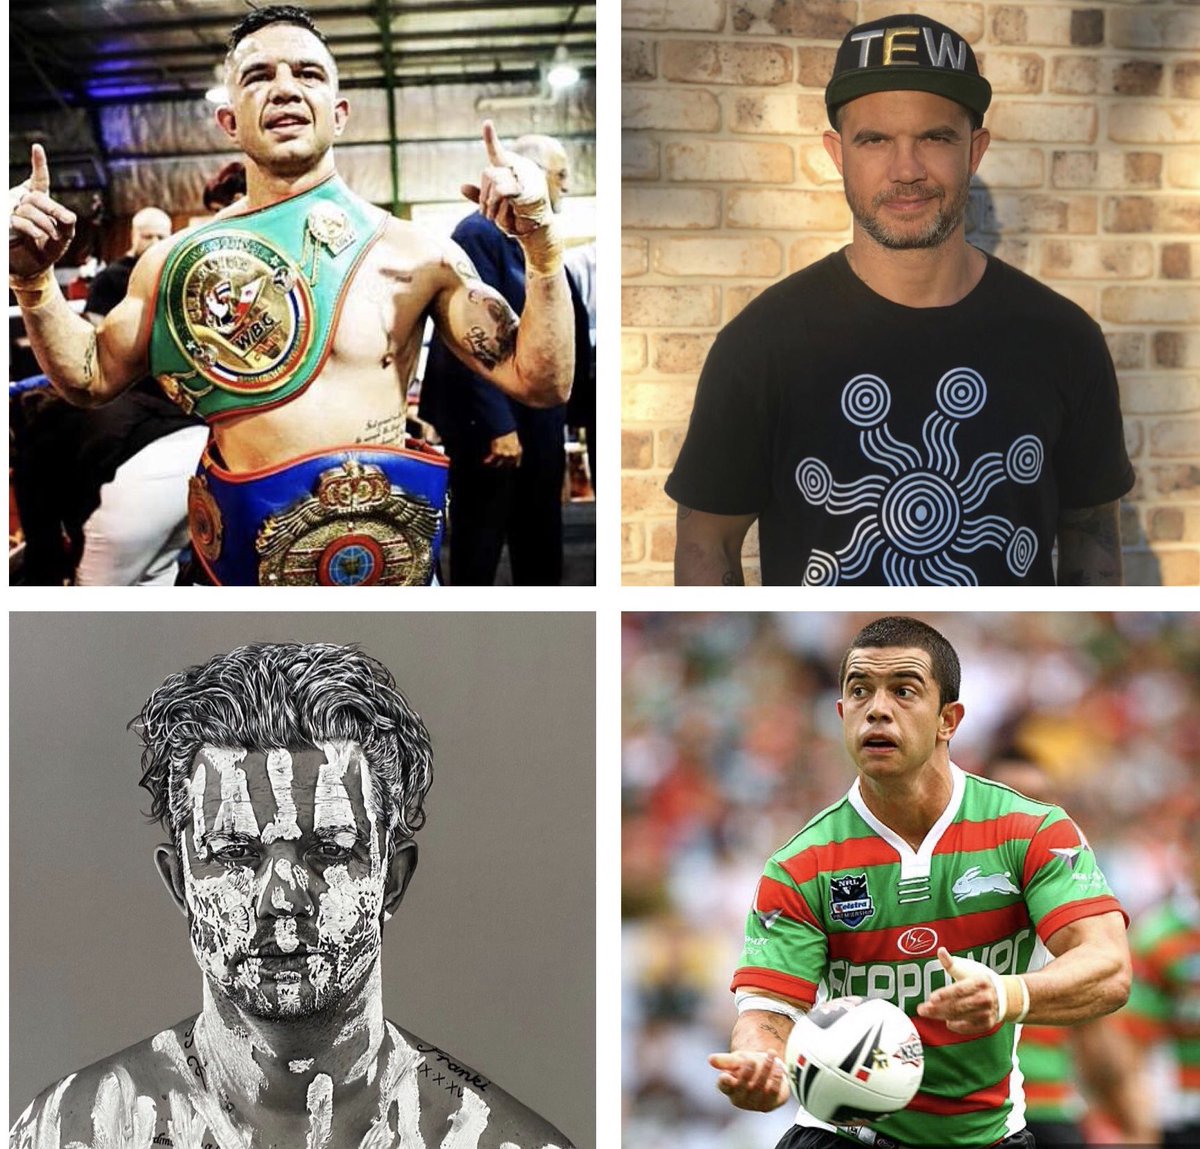 The 4 faces of @joewilliams_tew Wiradjuri/Wolgalu First Nations man in Australia. Played in the NRL for @SSFCRABBITOHS, professional boxer, lived his life with mental illness. Joes travels to communities looking to empower youth with wellness workshops.
#sharethemicnowaustralia